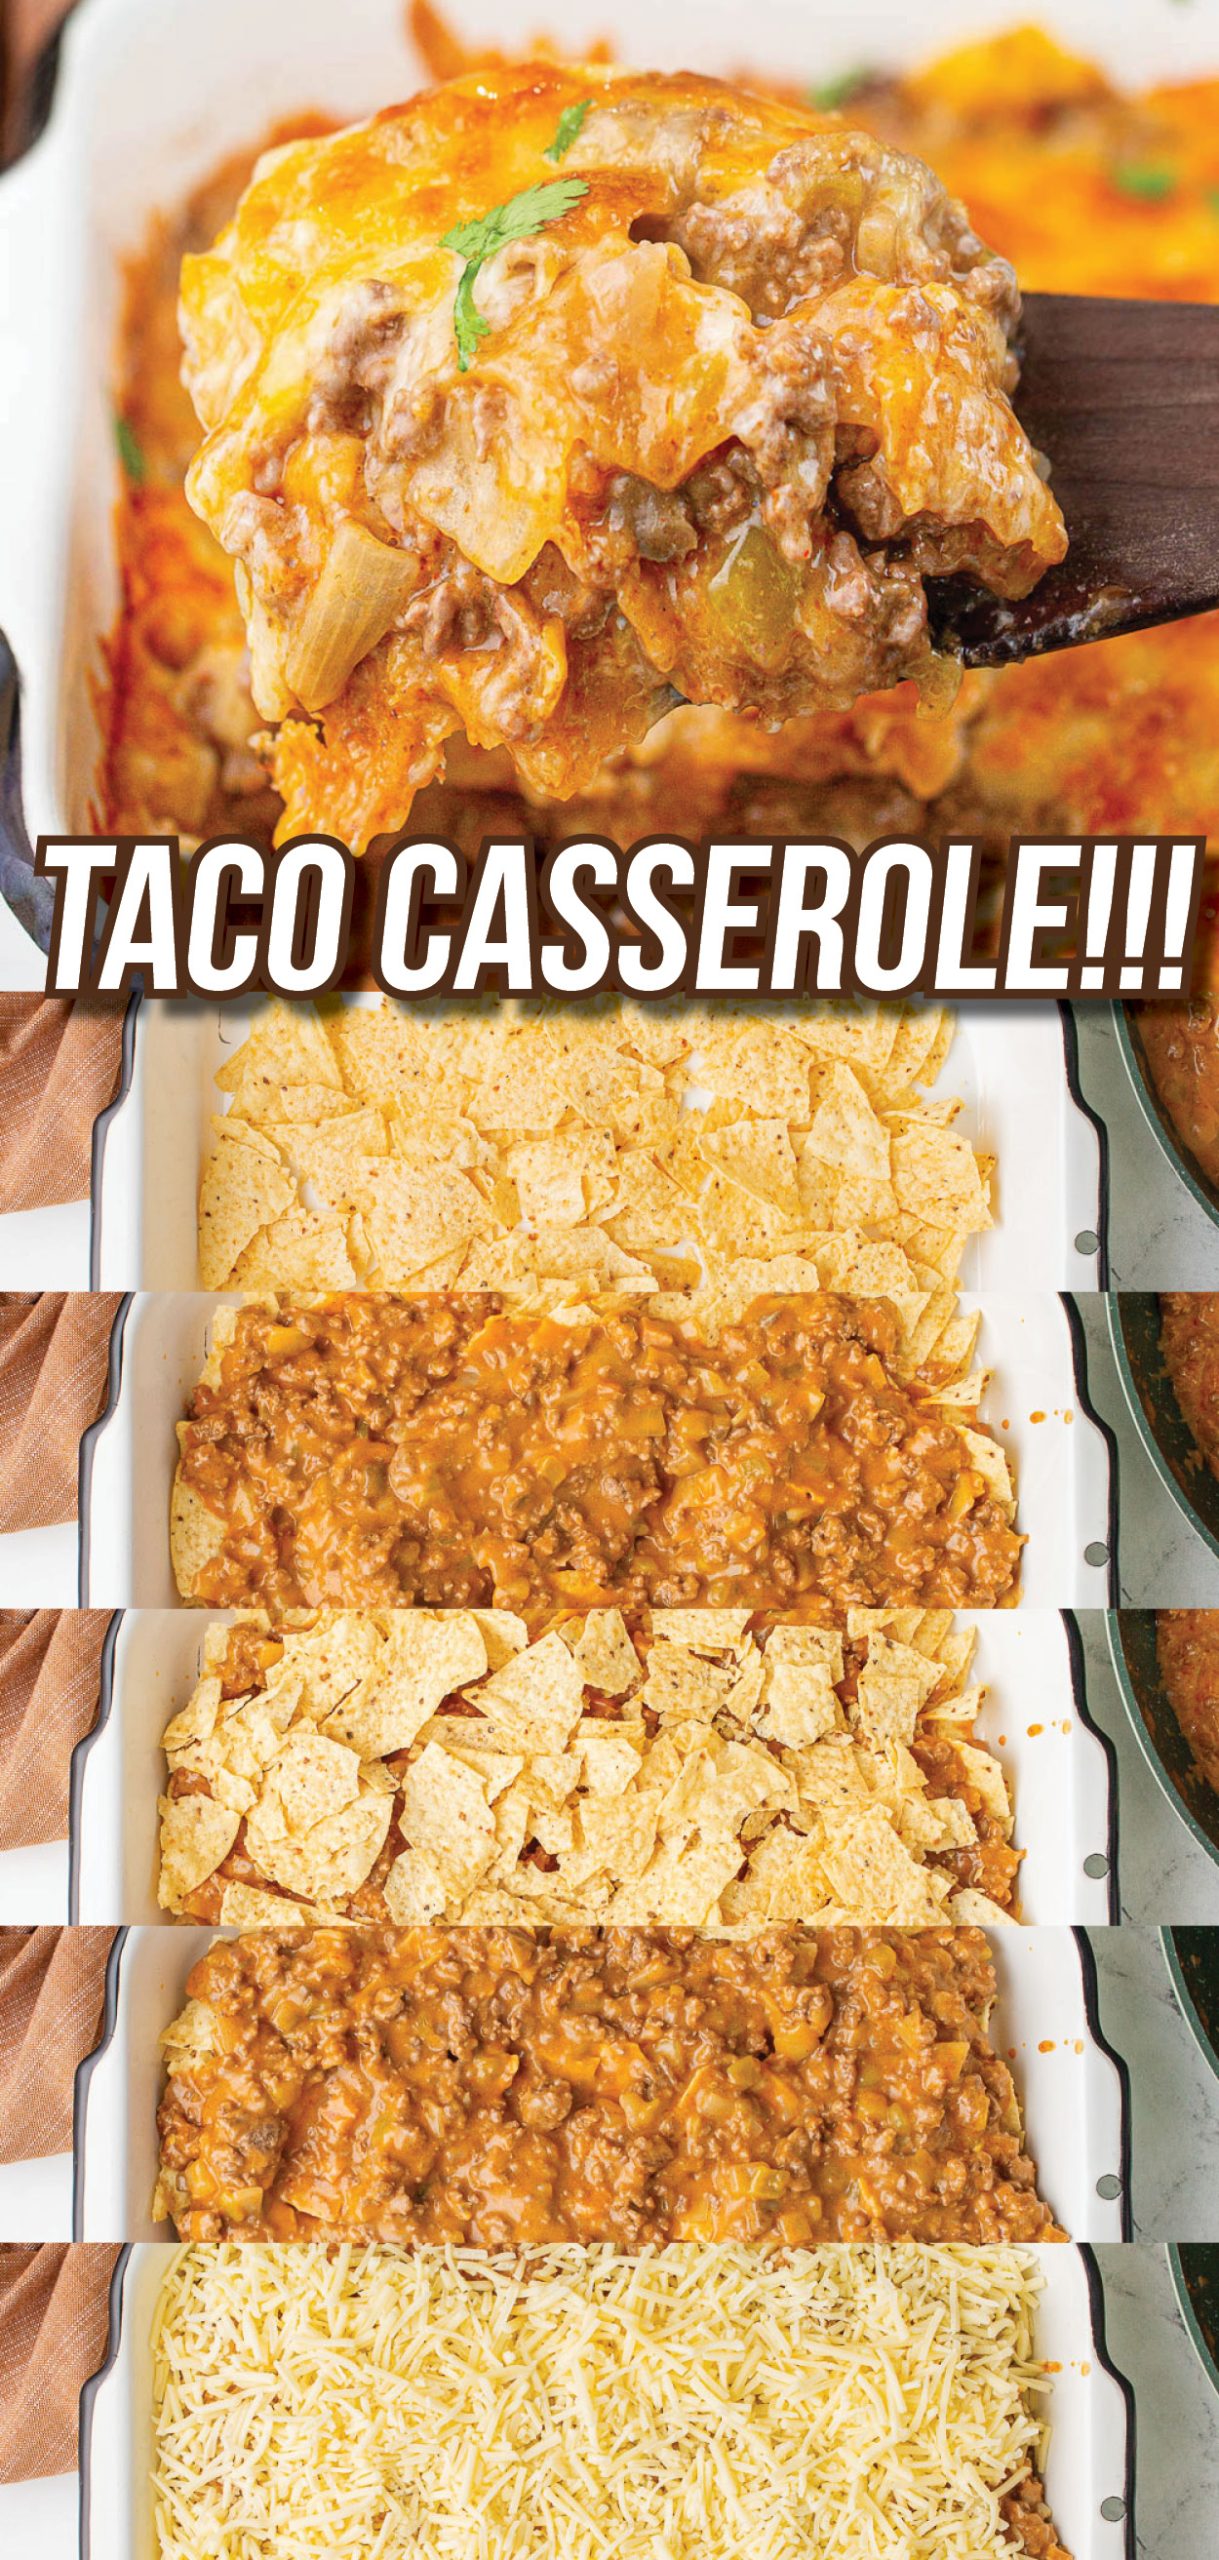 Taco Casserole - Everything you love about delicious tacos layered into one irresistible dish! It’s the ultimate easy comfort food for busy families.